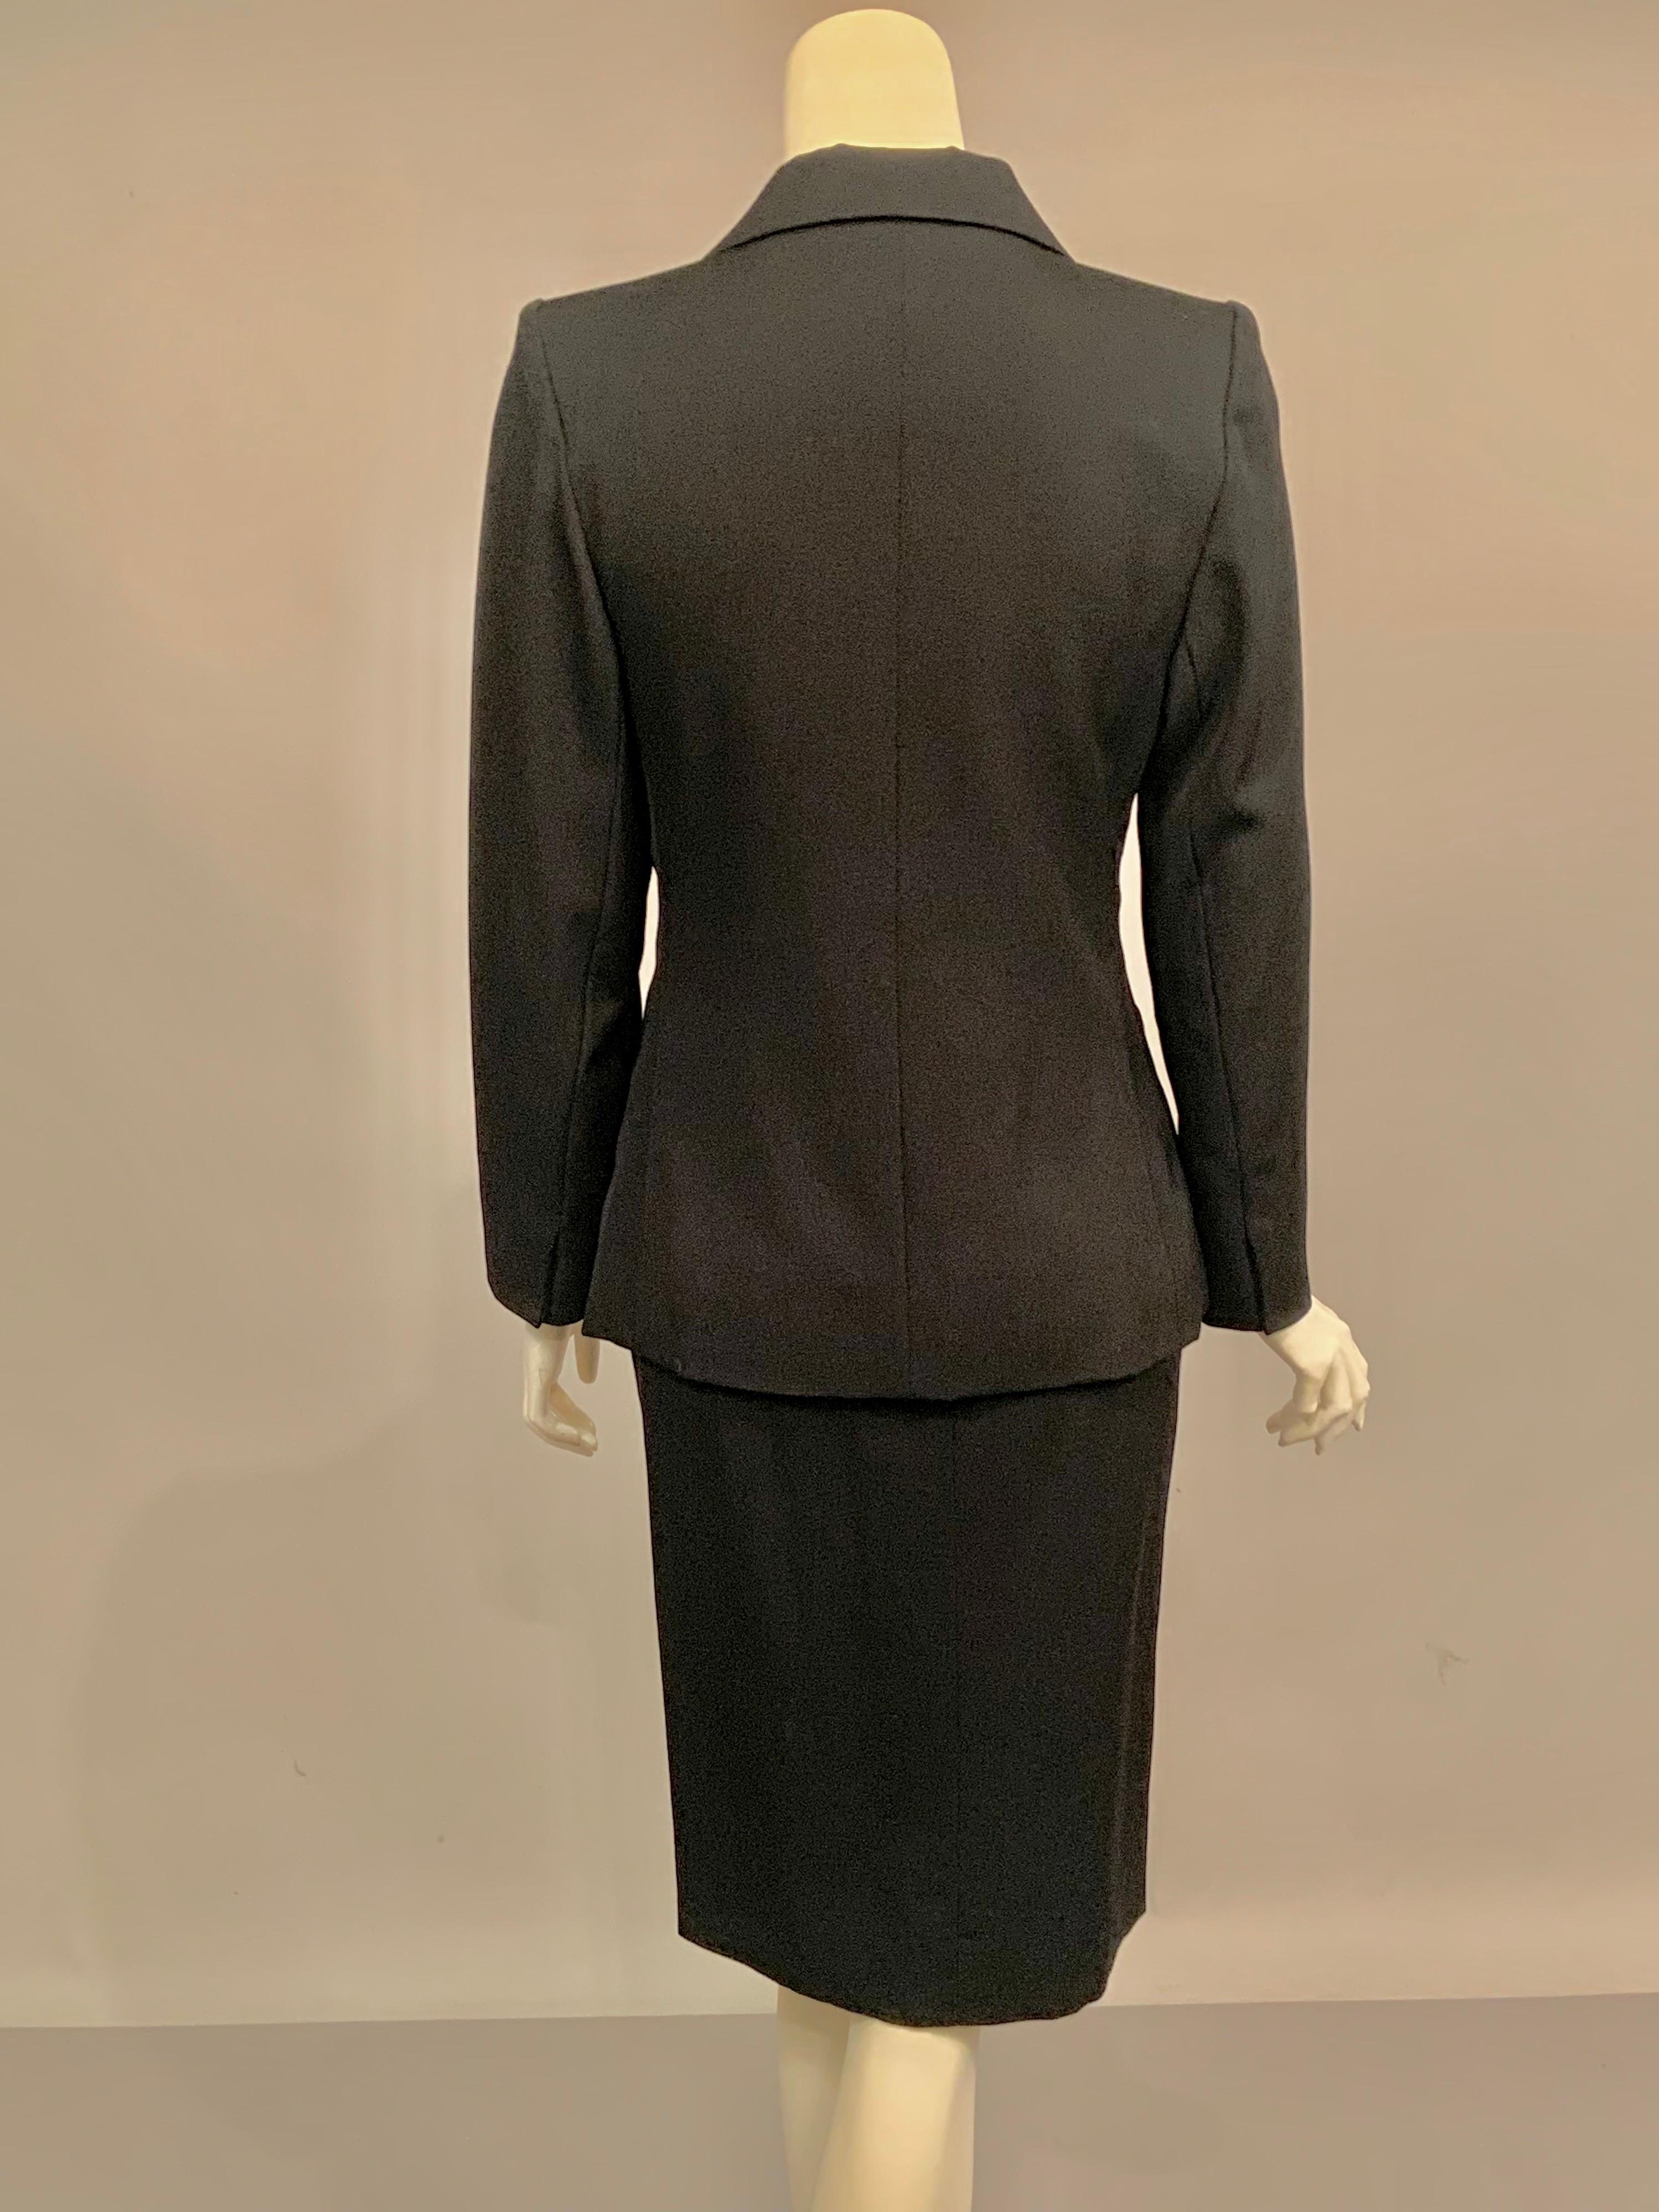 Yves Saint Laurent Vintage Le Smoking Tuxedo Suit  Never Worn YSL In Excellent Condition For Sale In New Hope, PA